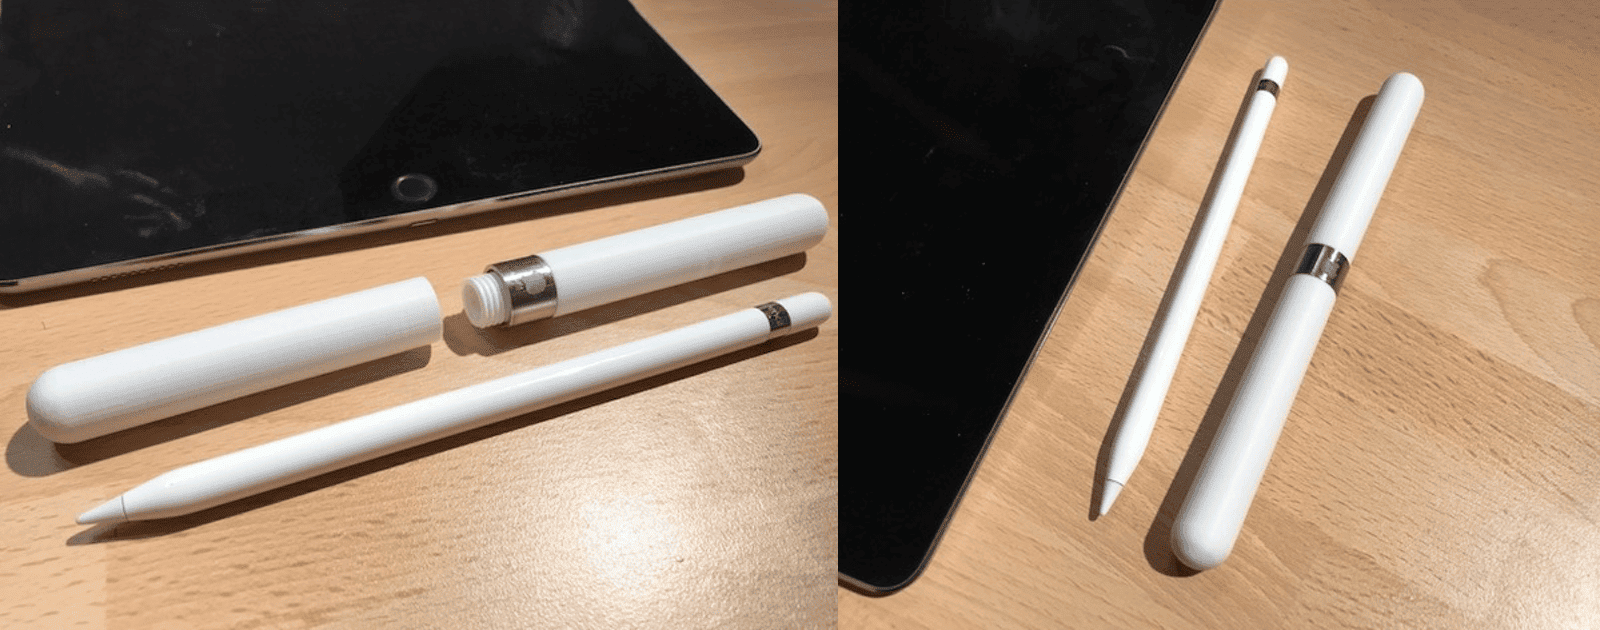 Need an Apple Pencil Case? You Can 3D Print This One The